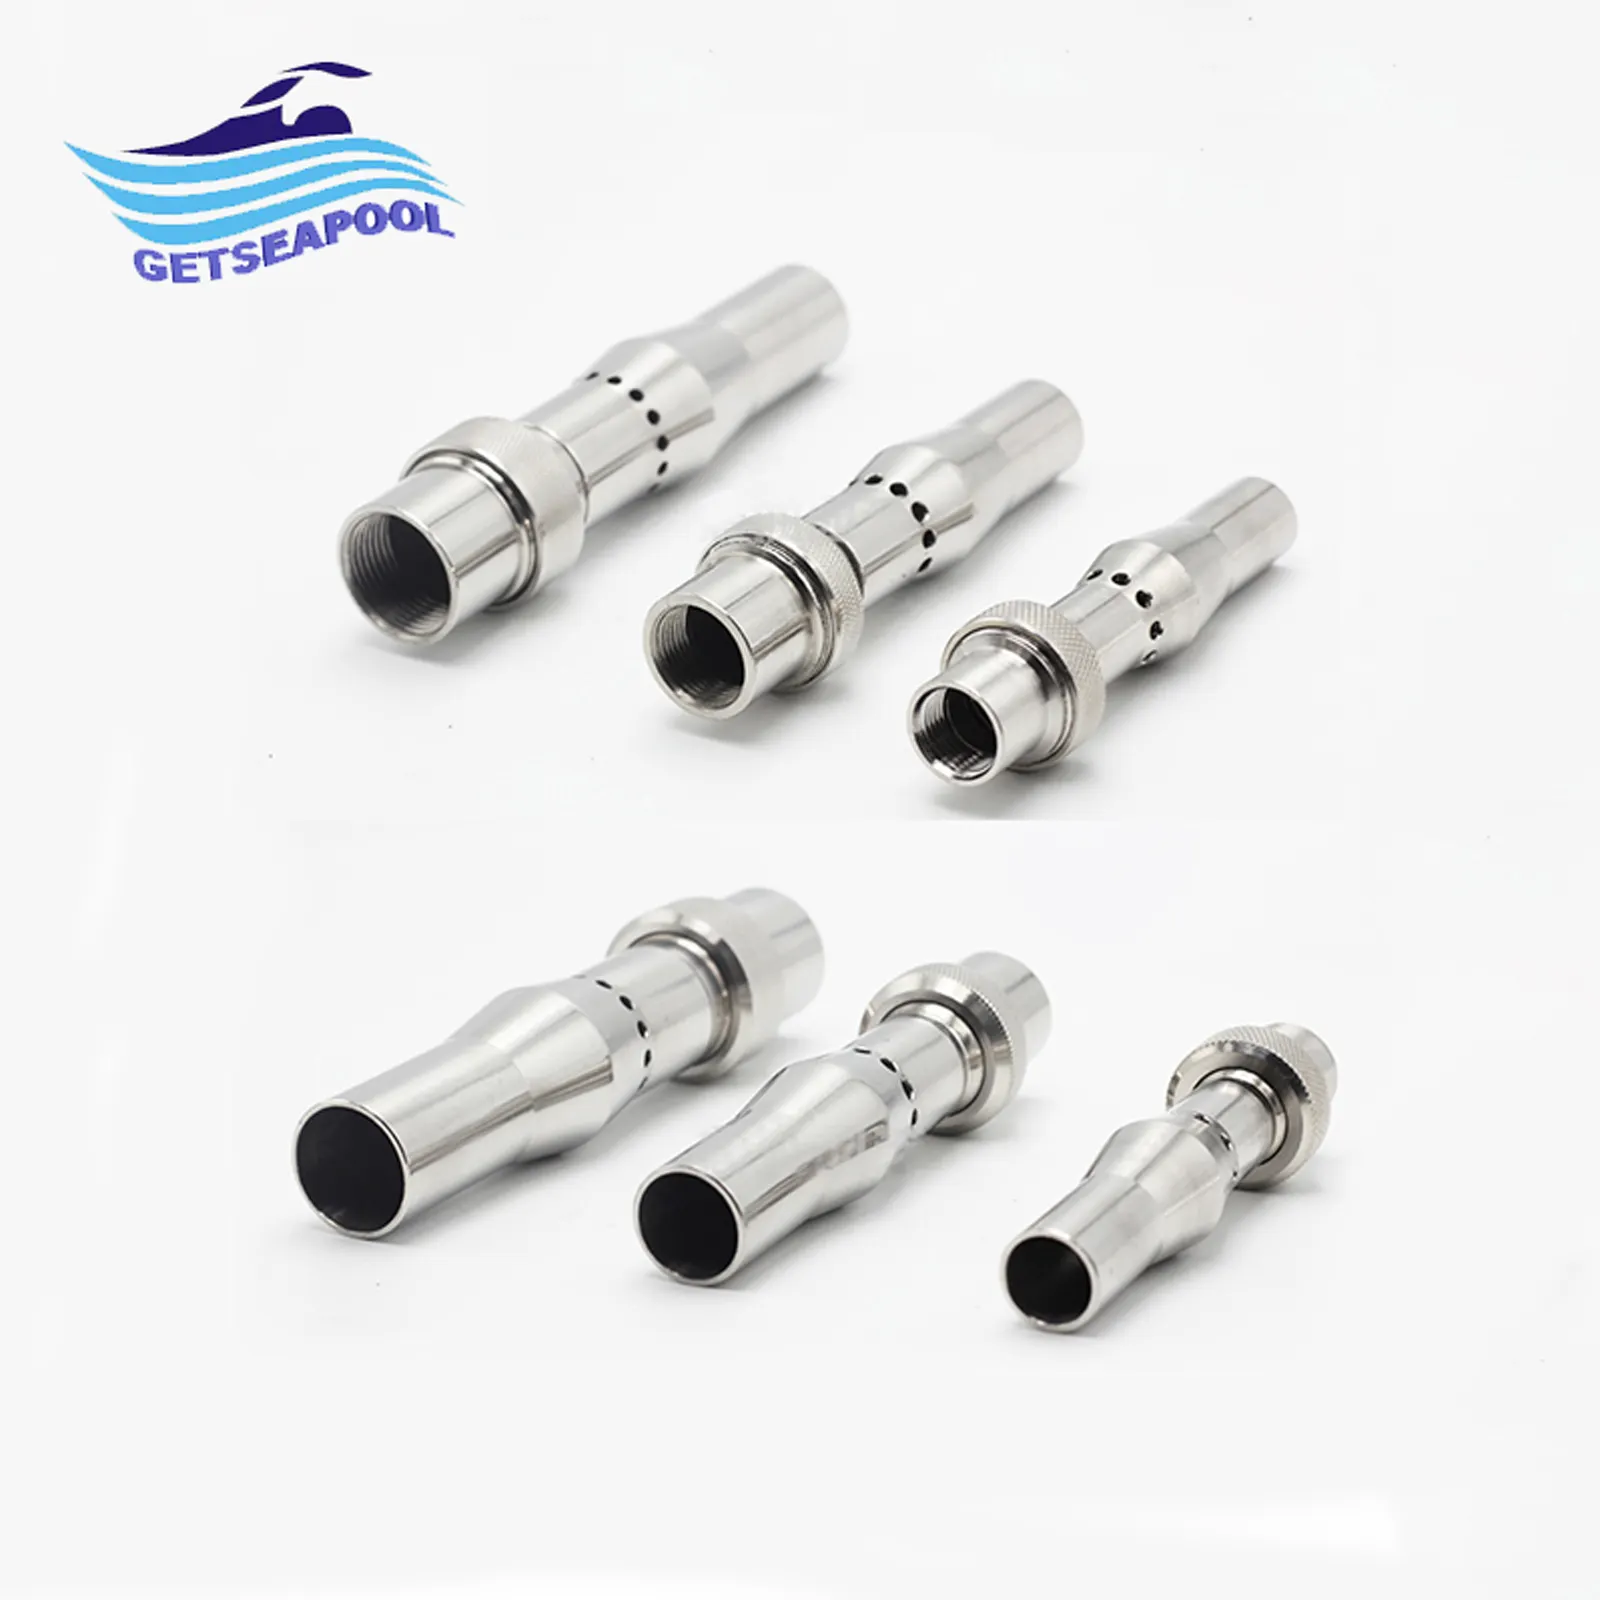 Stainless Steel Swimming Pool Nozzle Jumping Jets Laminar Jet Water Adjustable Jet Straight Pond Fountain